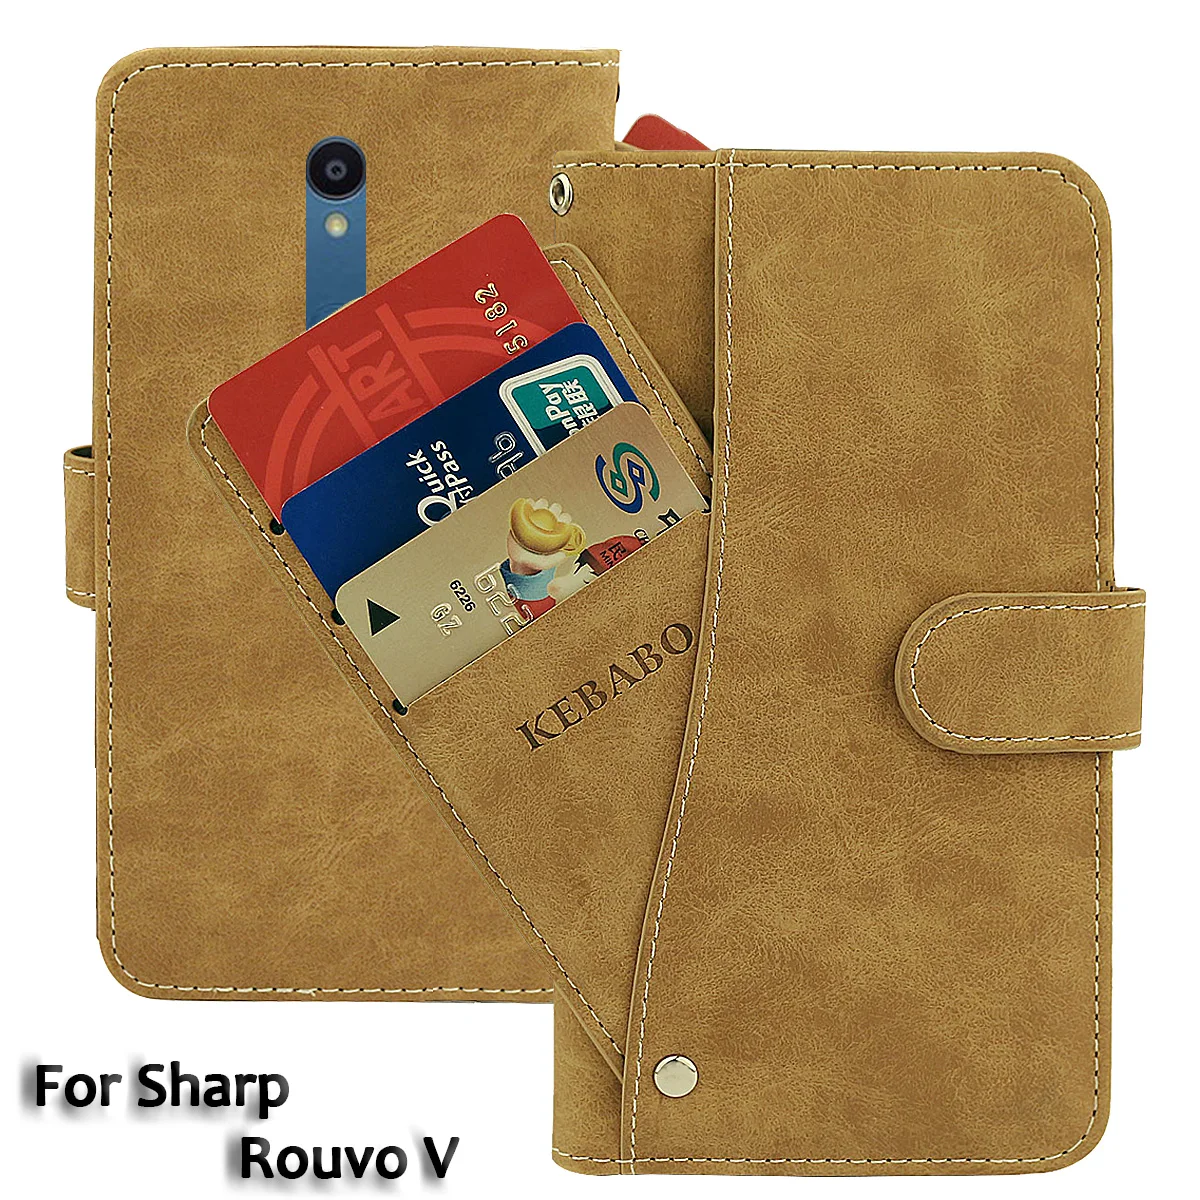 

Vintage Leather Wallet For Sharp Rouvo V Case 6.52" Flip Luxury Card Slots Cover Magnet Phone Protective Cases Bags